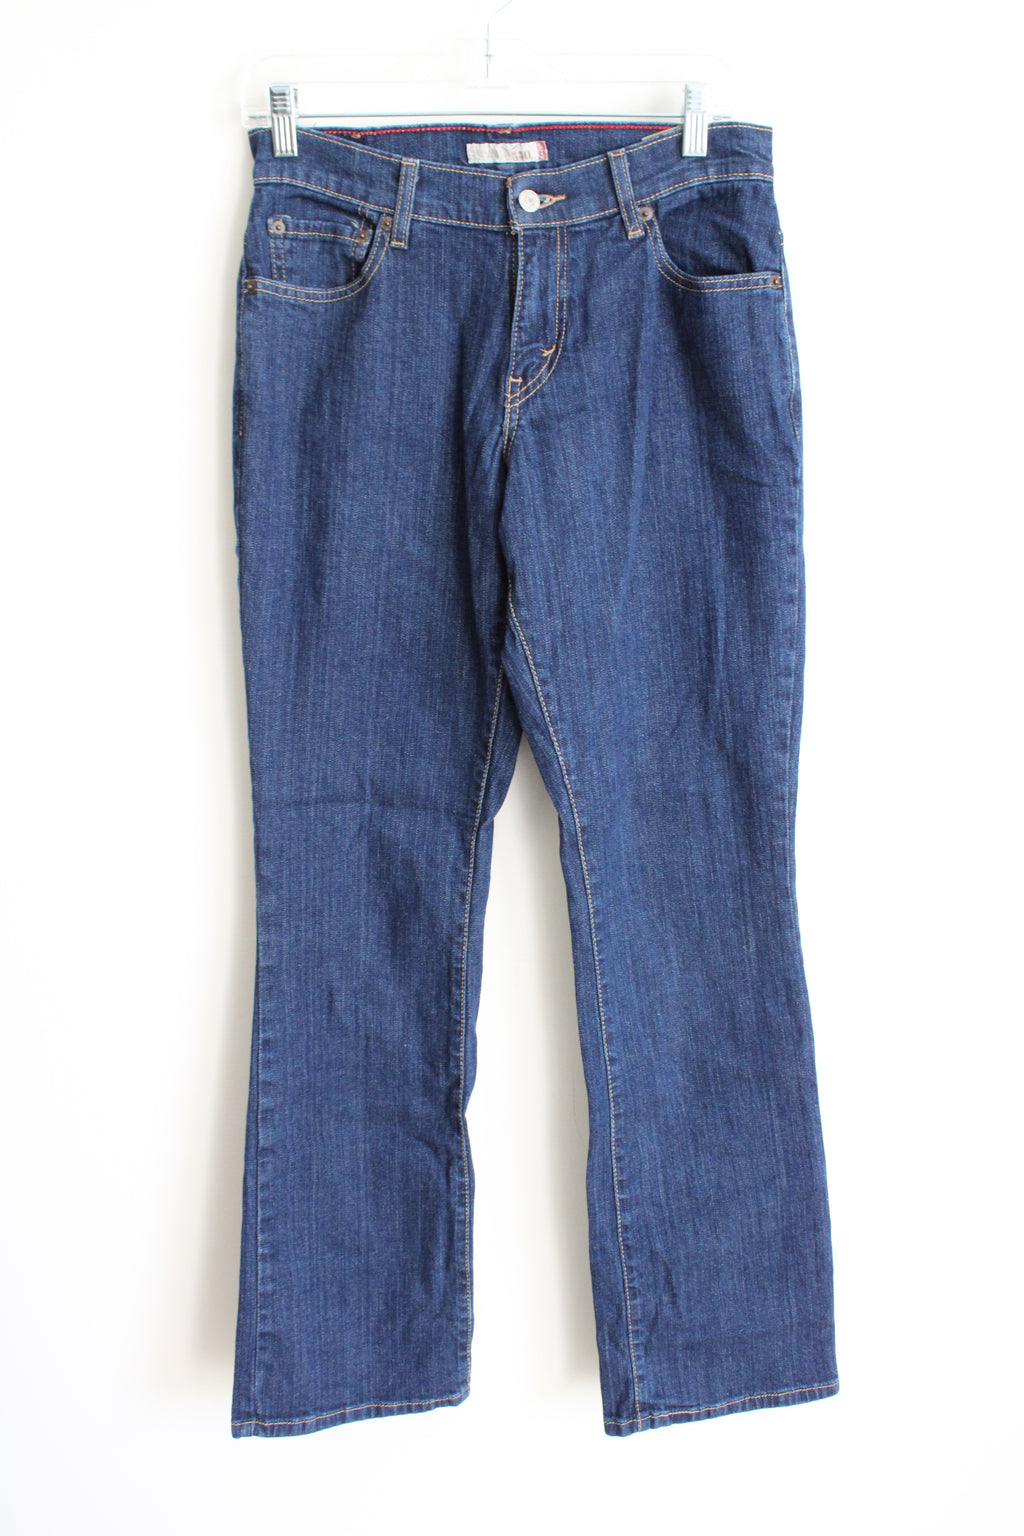 Levi's 550 Relaxed Bootcut Jeans | 4